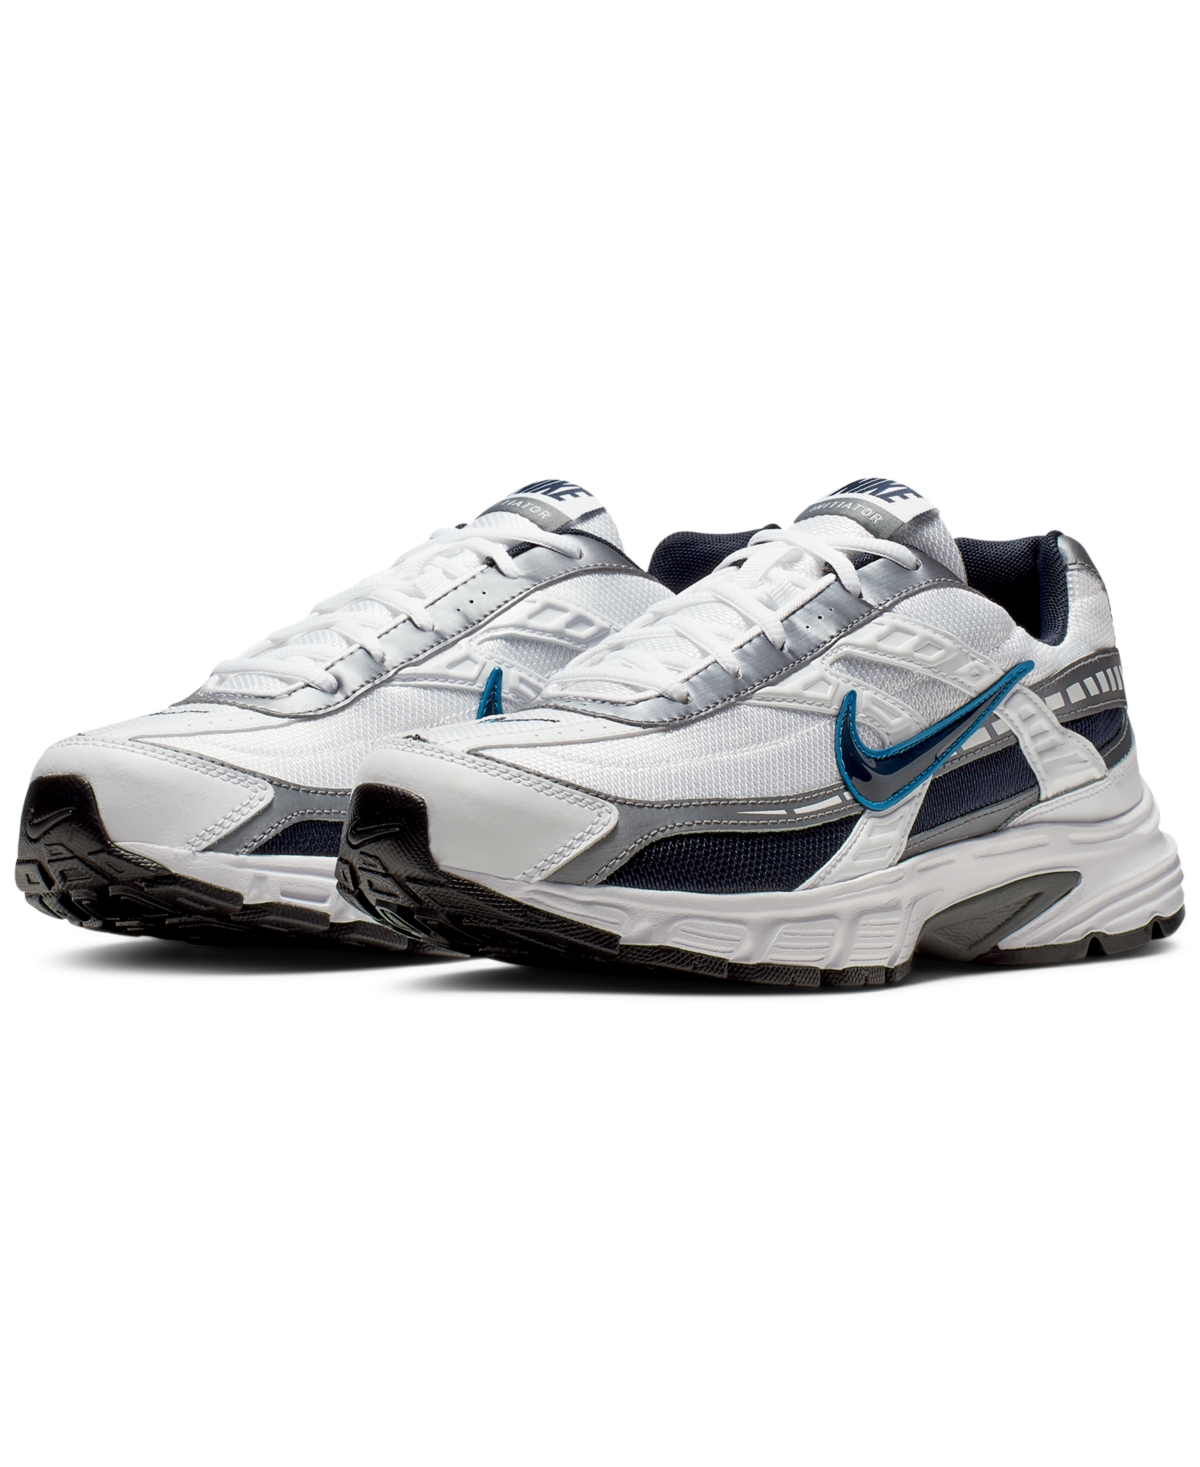 Men's Initiator Running Sneakers from Finish Line - White/Silver